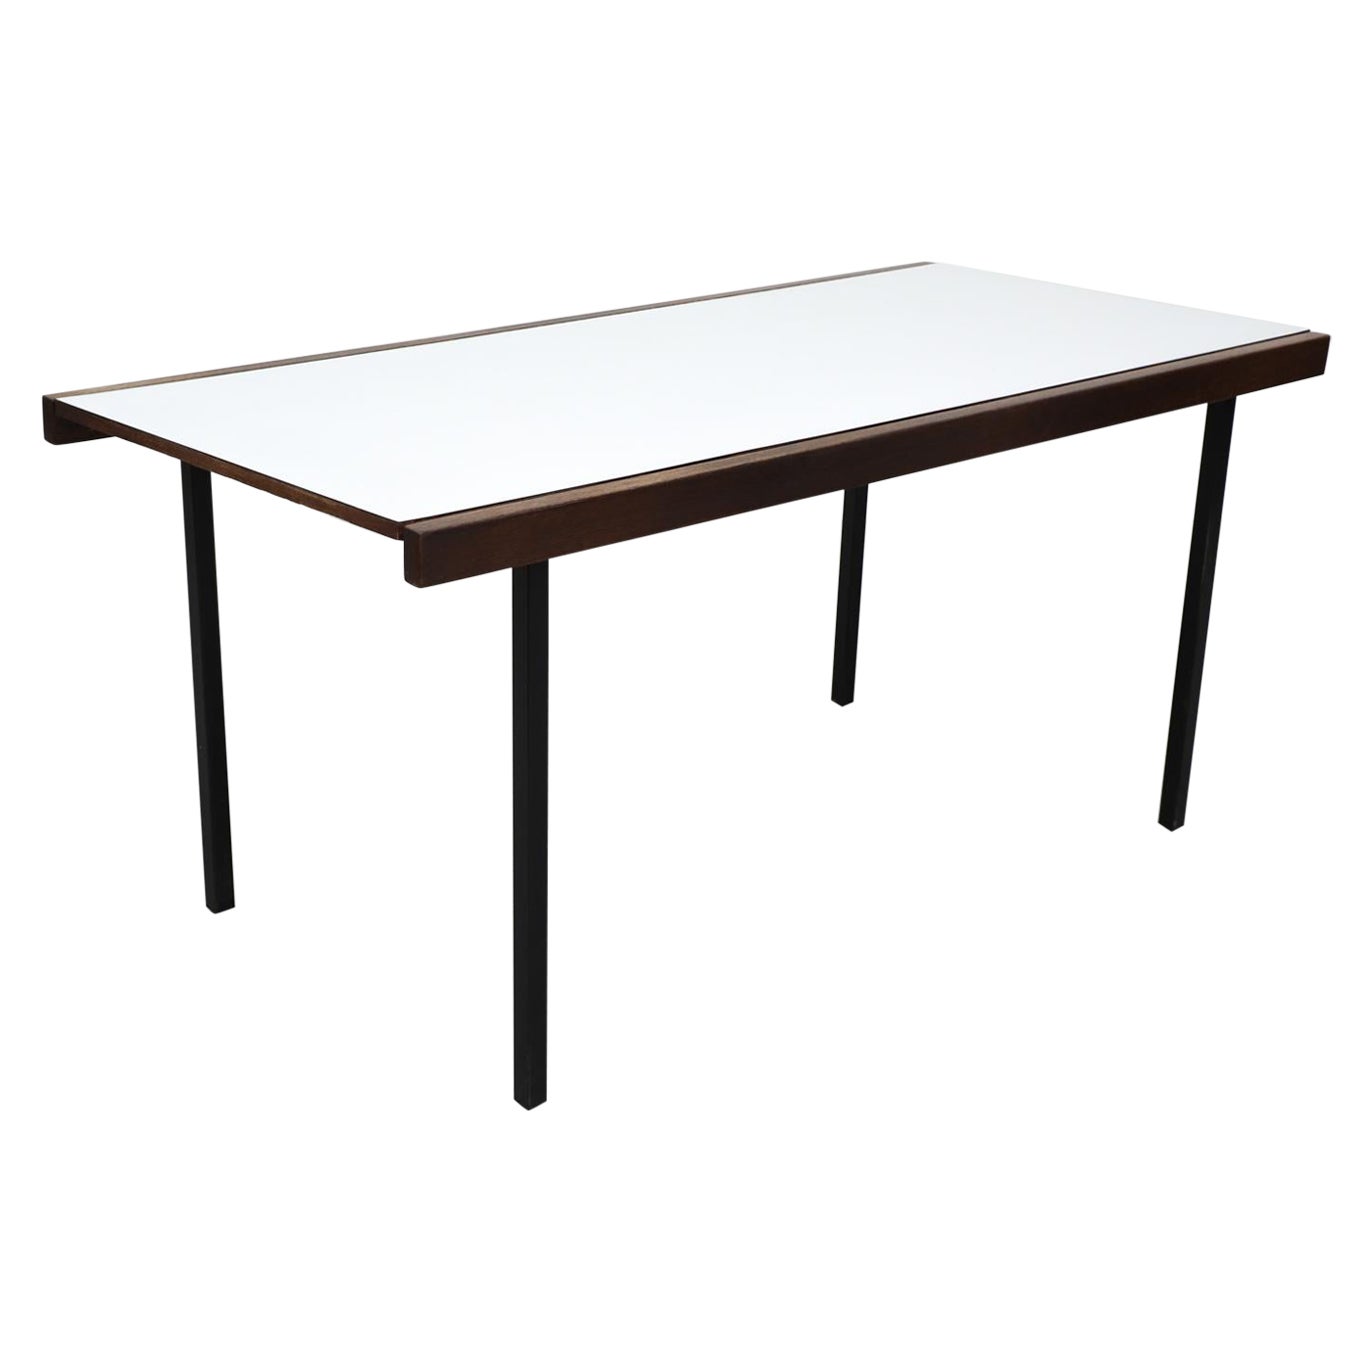 Martin Visser for 't Spectrum "TE21" or "Weert" Wenge Table with Formica top For Sale